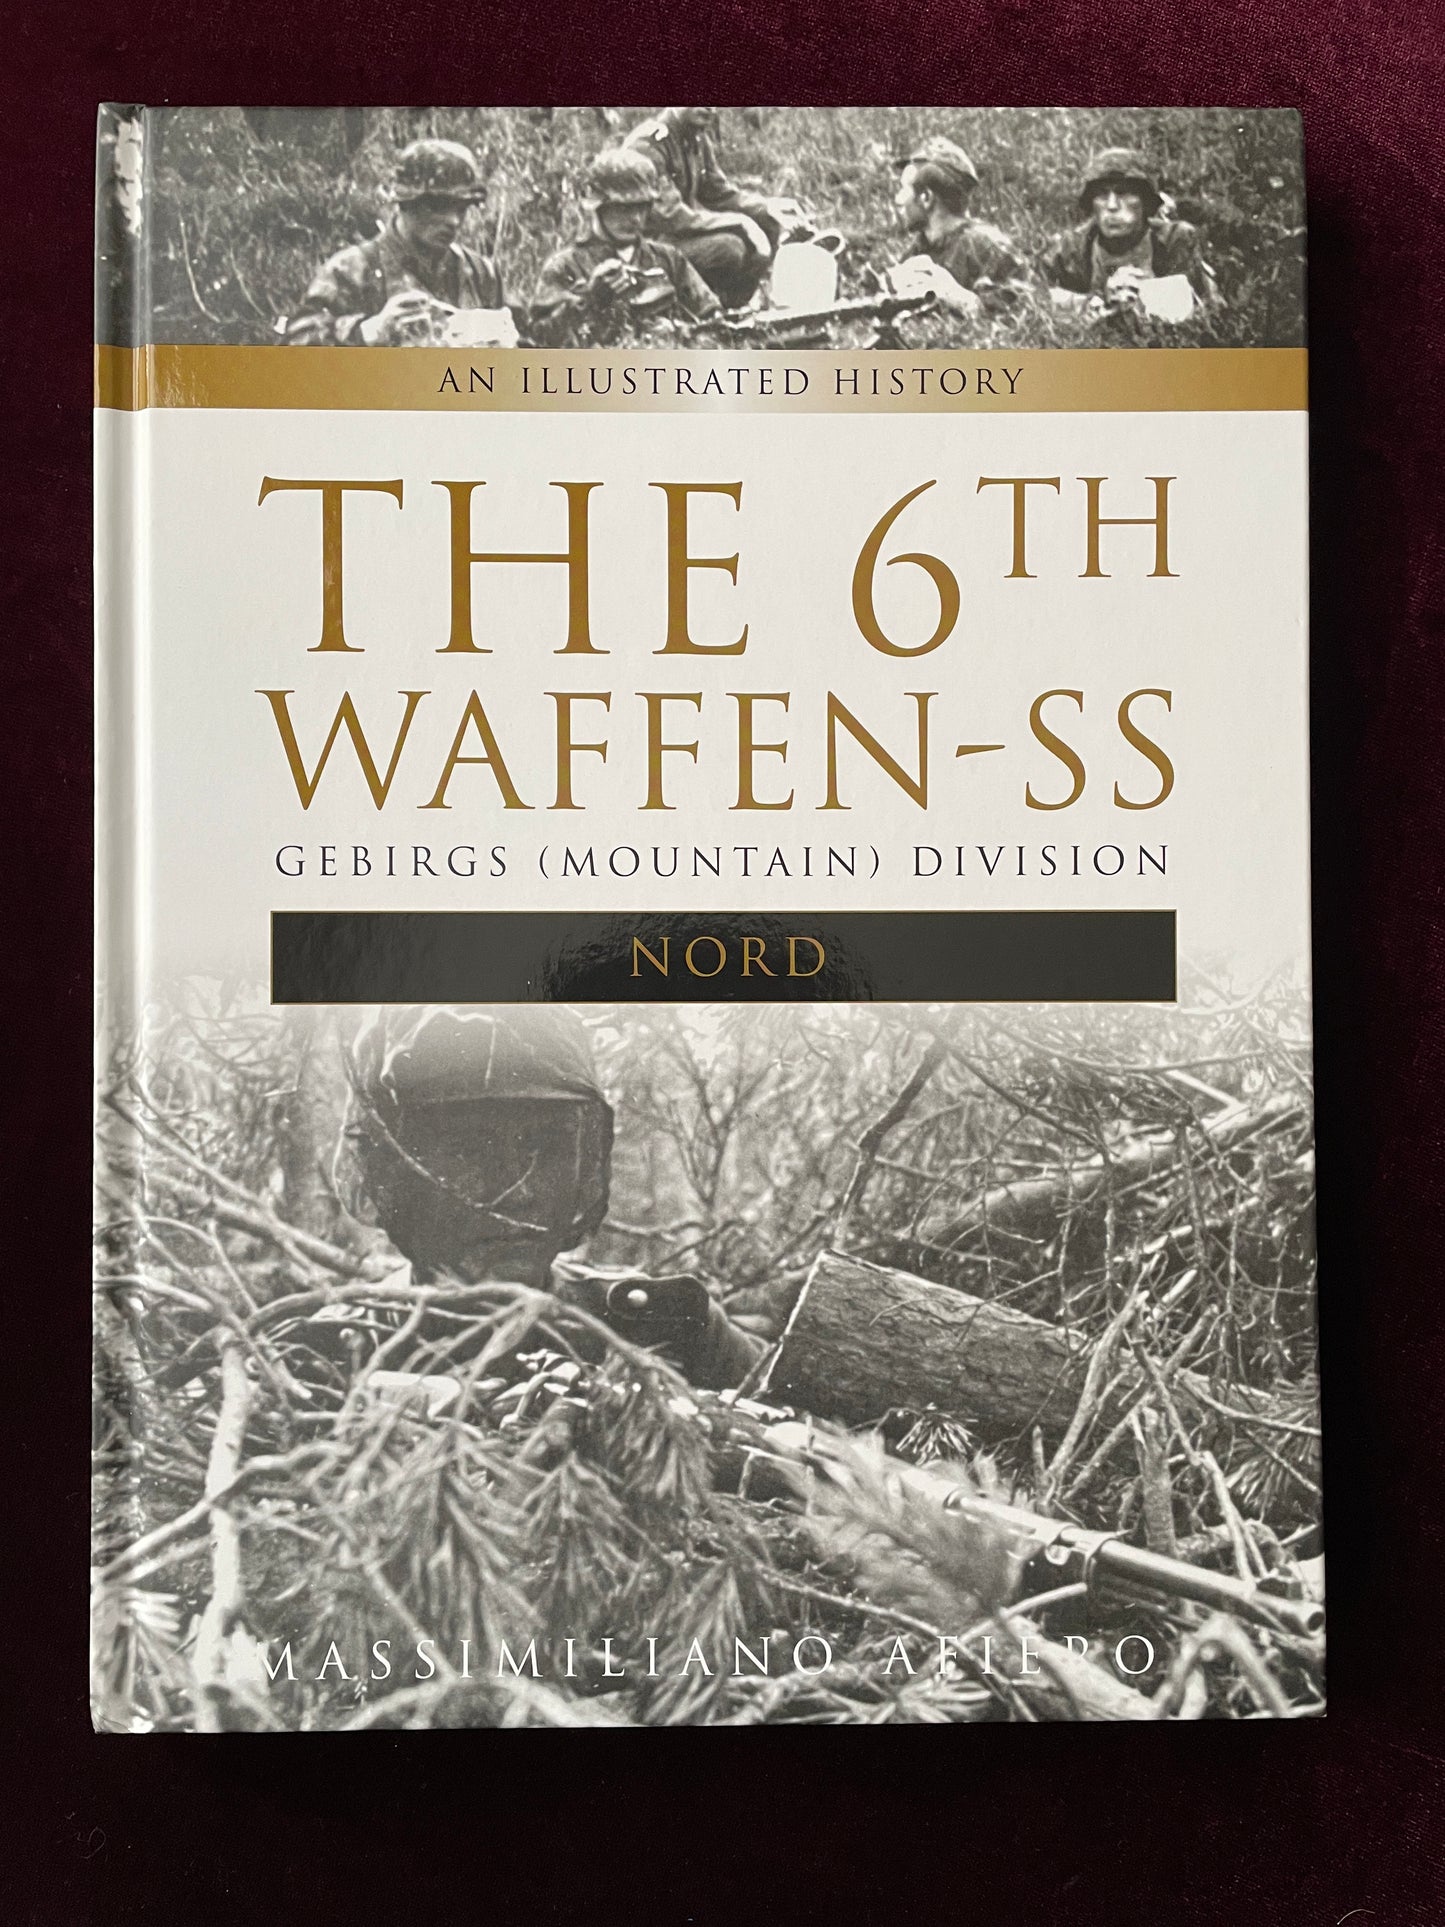 The 6th Waffen-SS Gebirgs (Mountain) Division